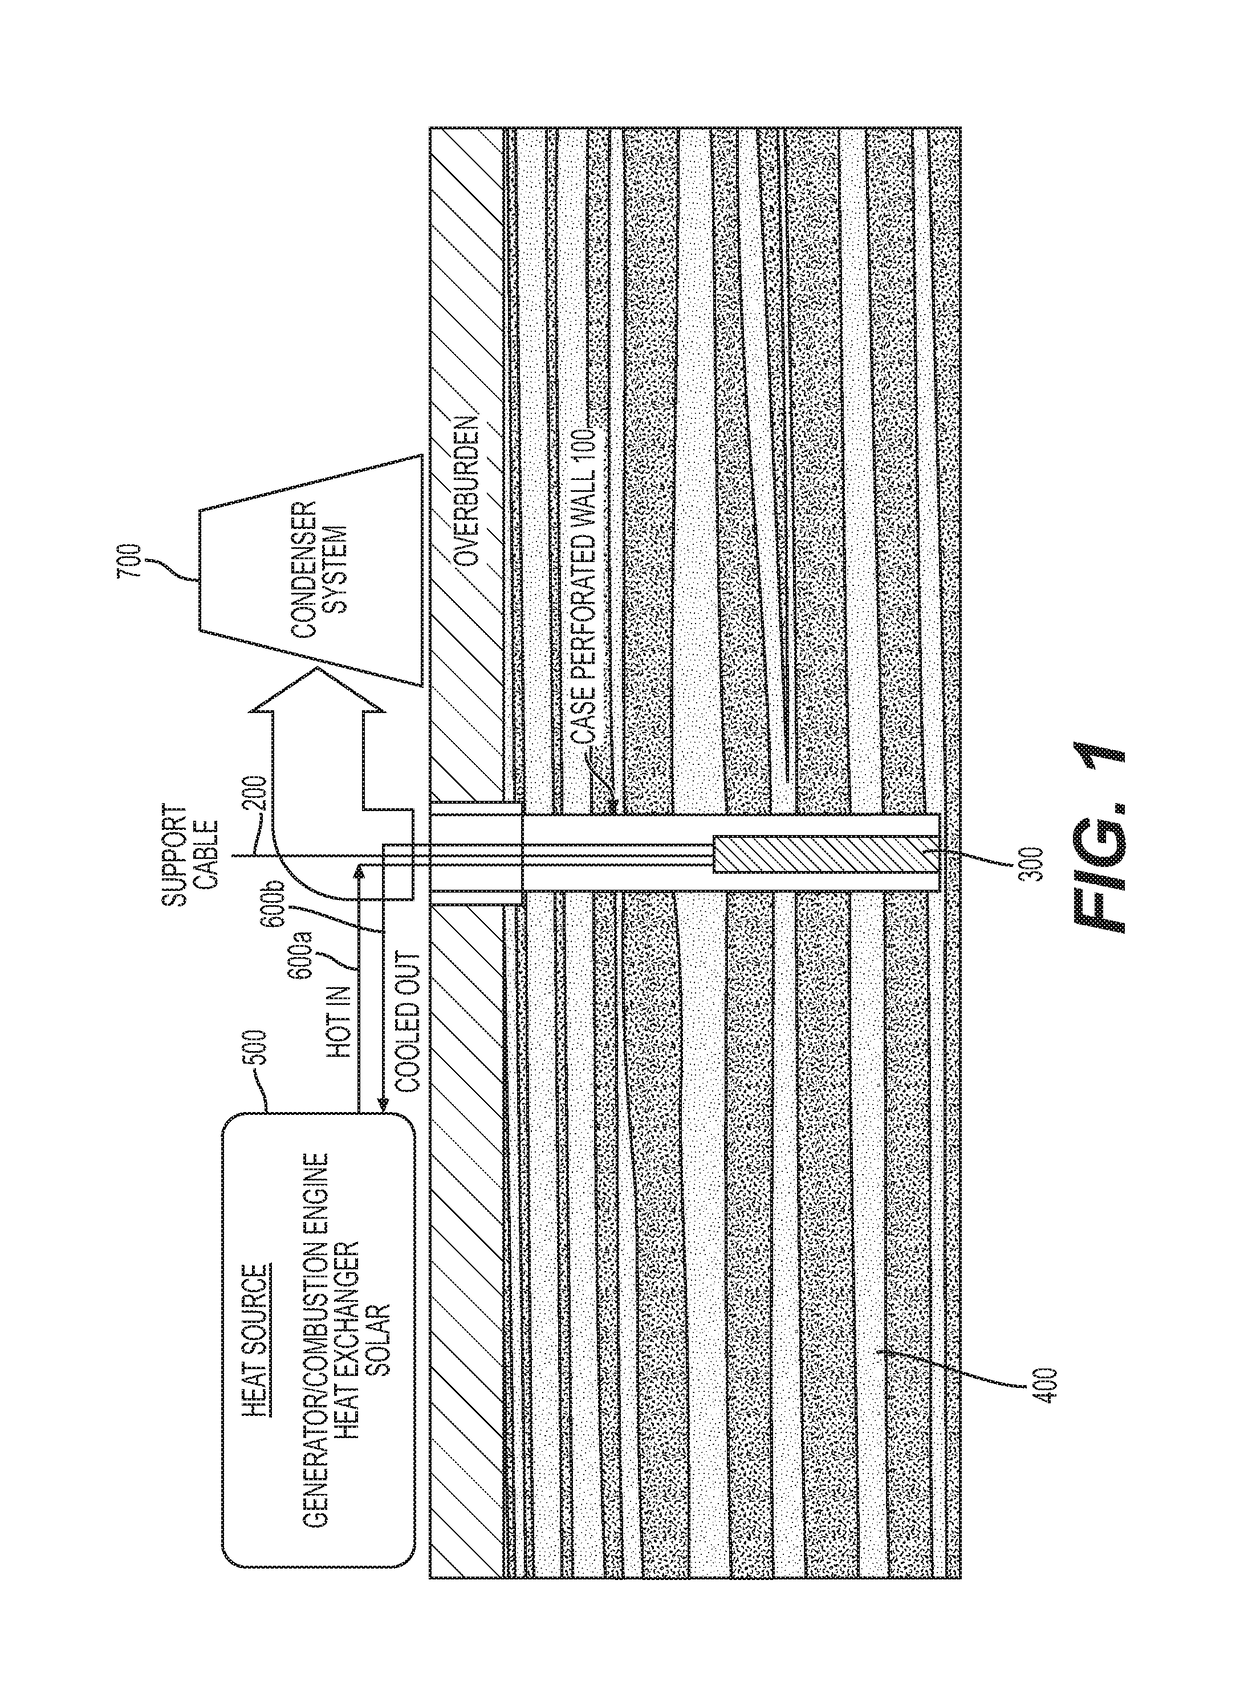 Systems and methods for the in situ recovery of hydrocarbonaceous products from oil shale and/or oil sands